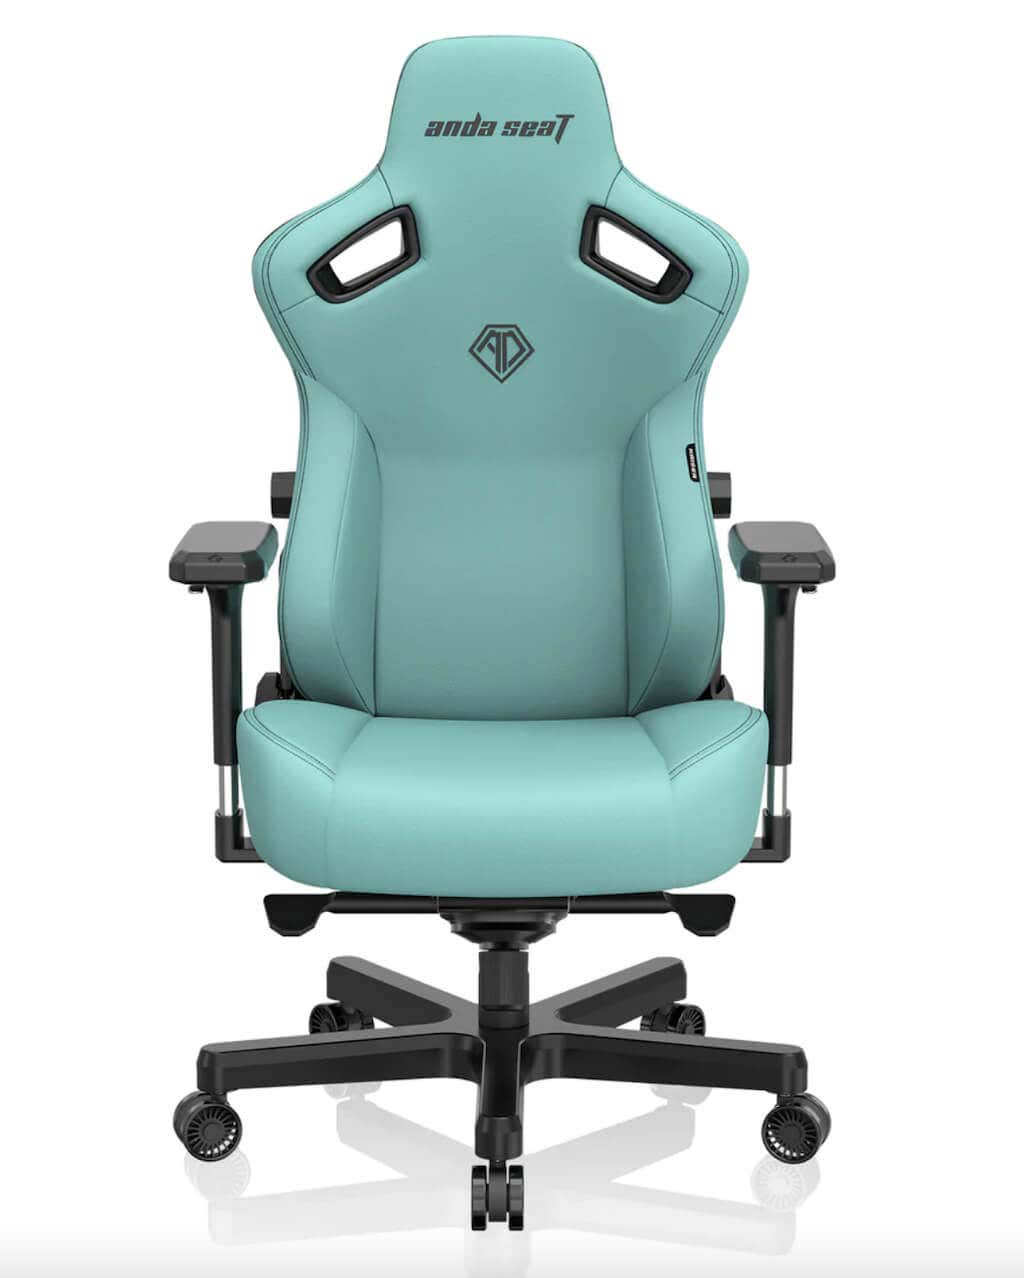 1680011187 13 6 Best Gaming Chairs for Big and Tall Guys